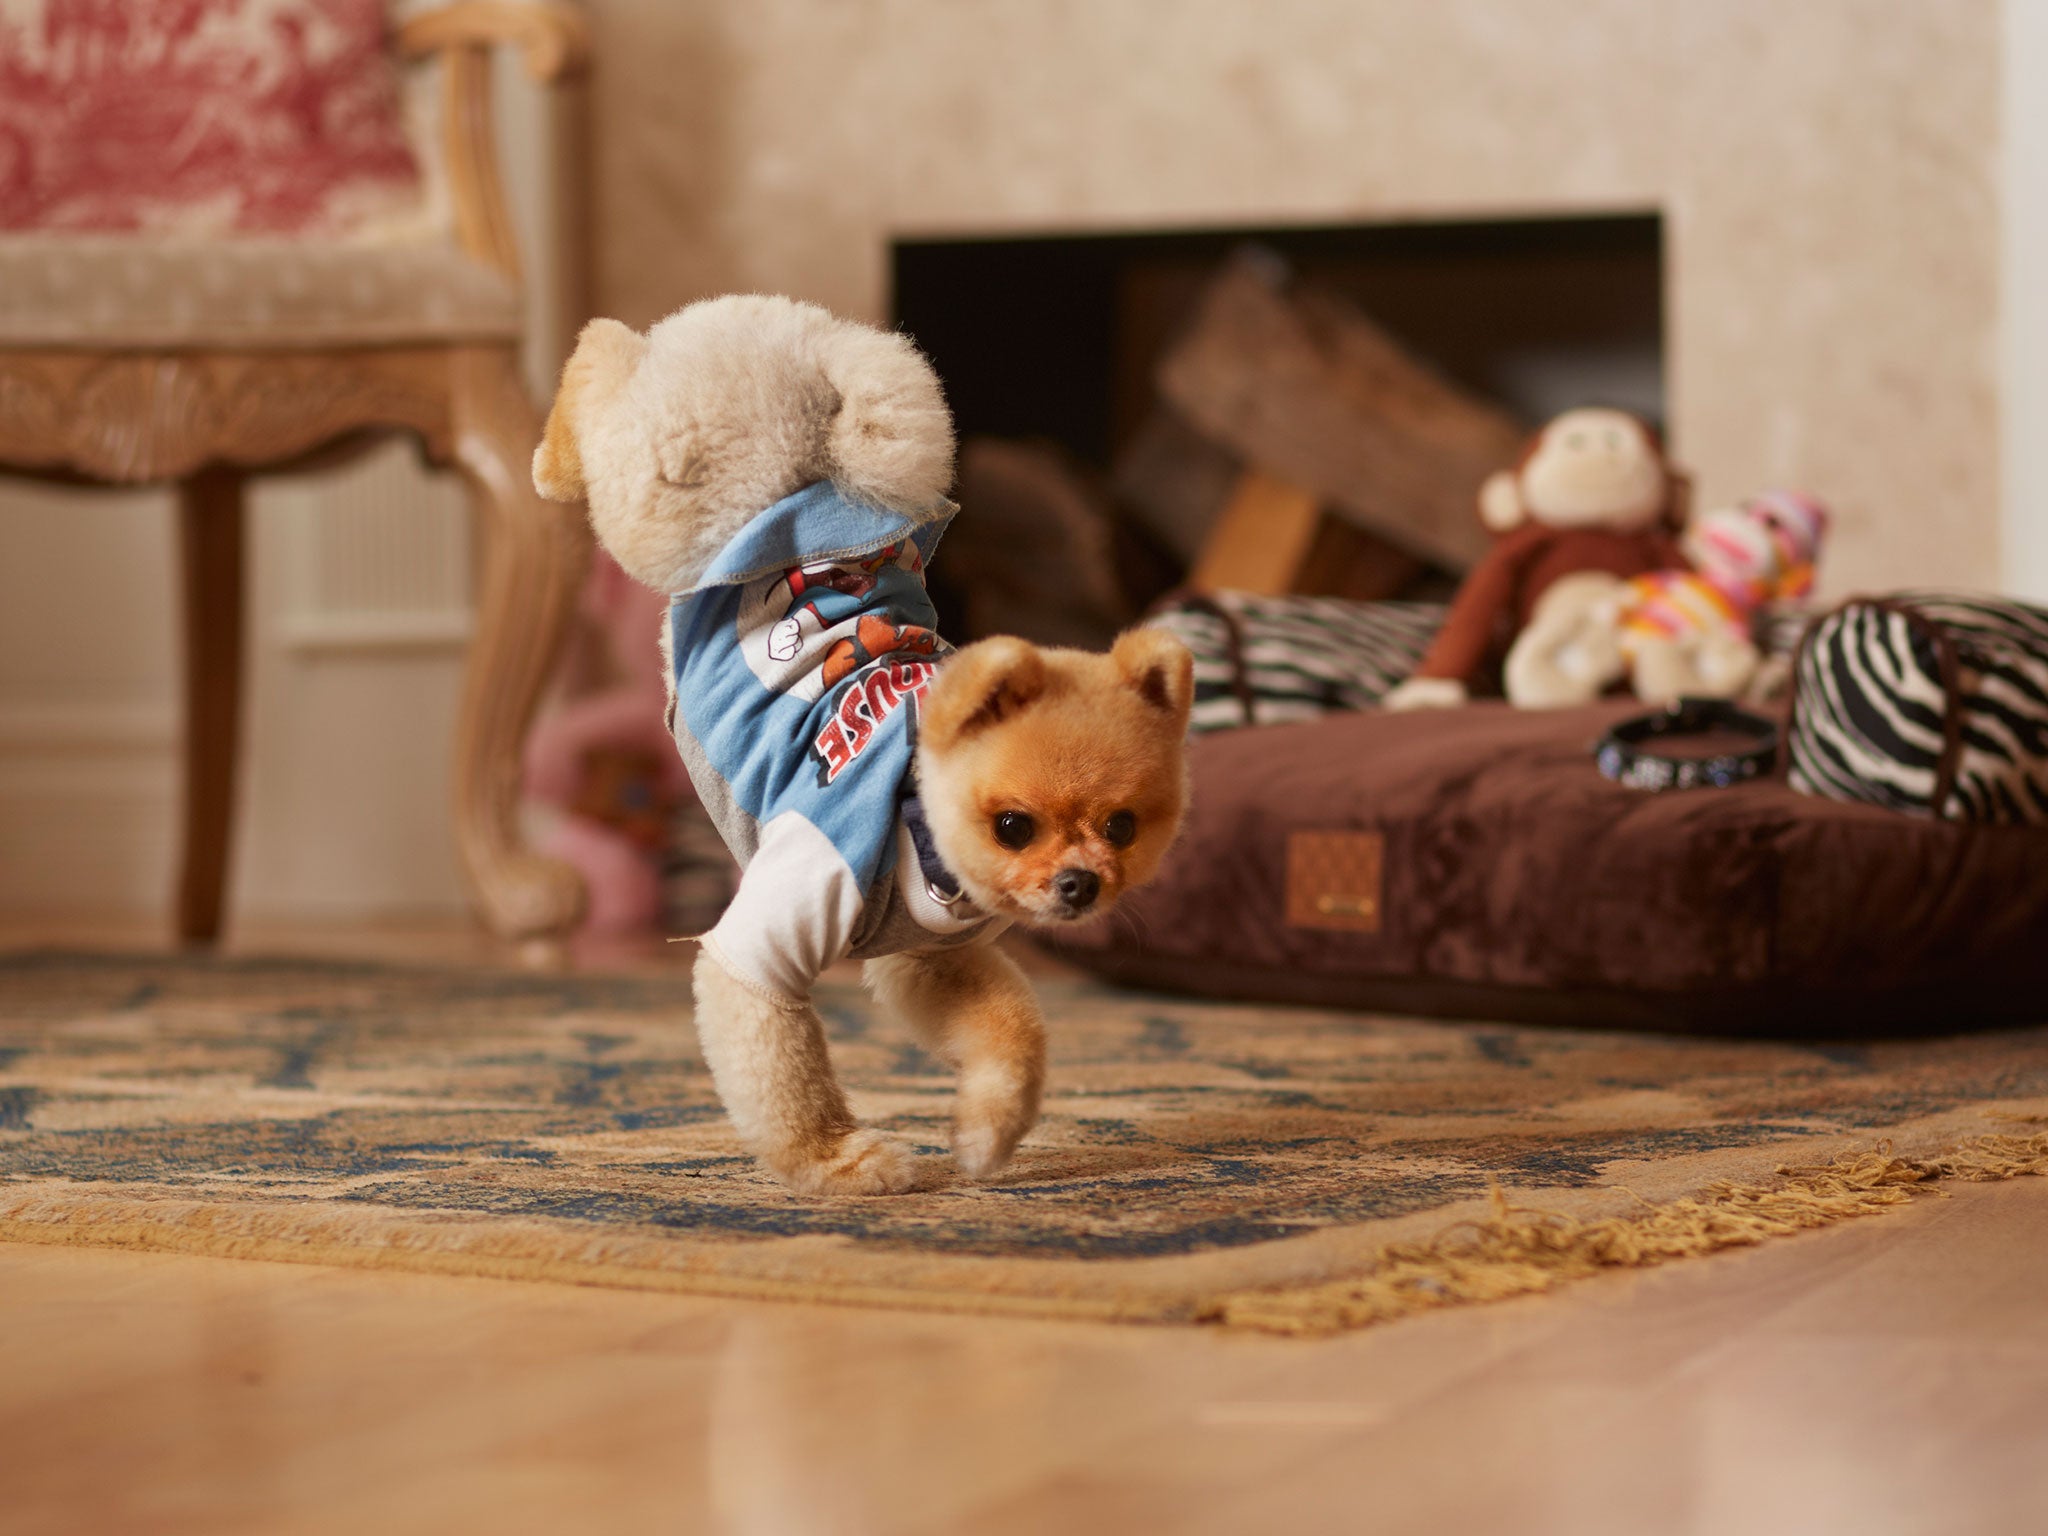 Actor, model and now record breaker: Jiff the Pomeranian